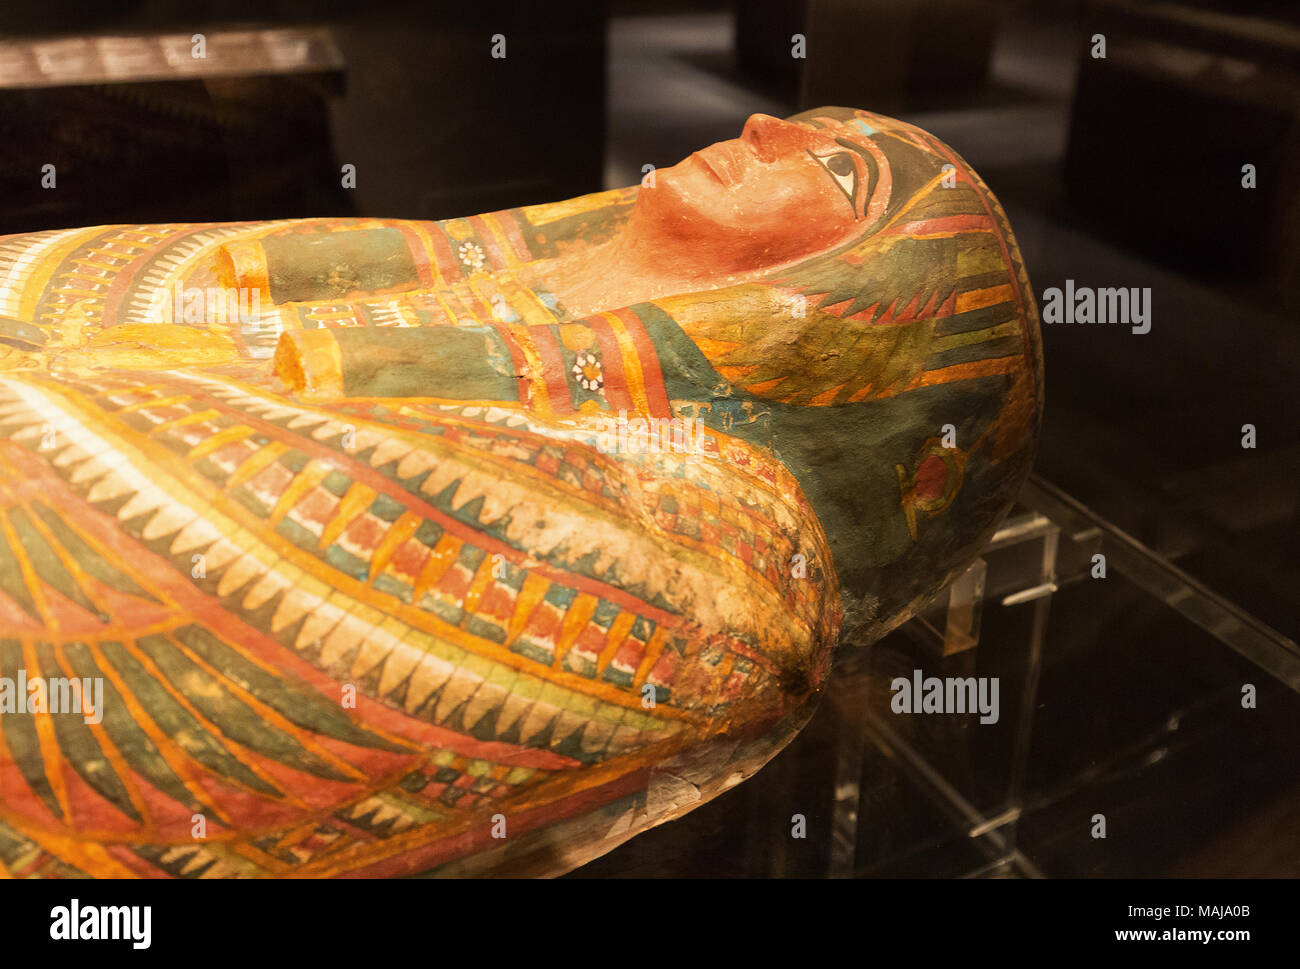 Ancient egyptian mummy case of Bakenrenes, from third intermediate period, Dynasty 25, from Ancient Egypt; in Houston Museum of natural Science, Texas Stock Photo